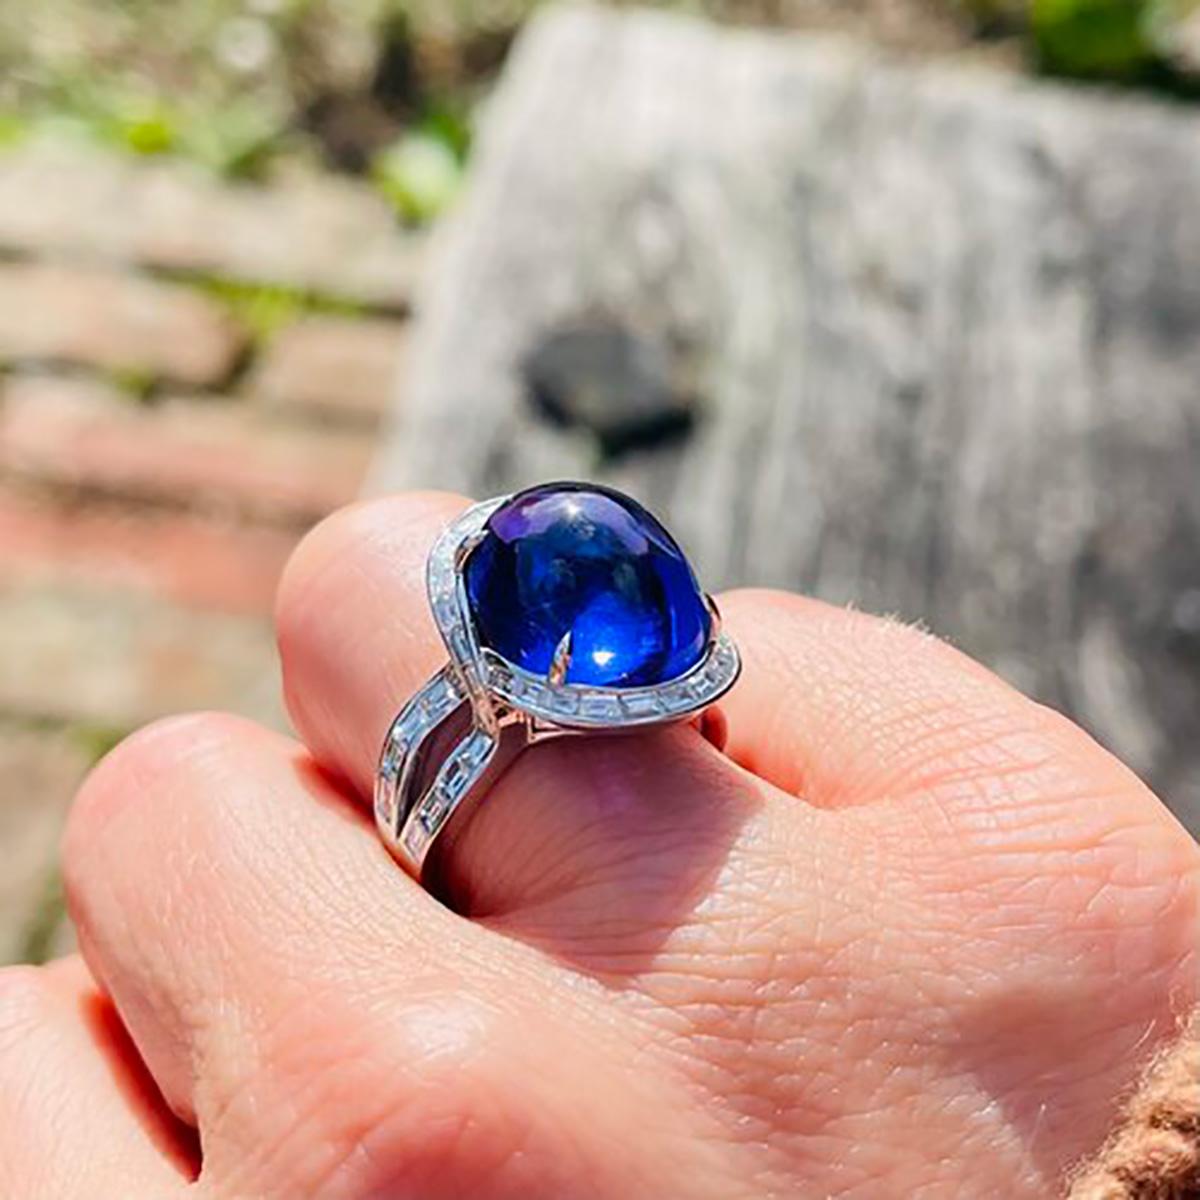 Exclusive 18kt white gold approximately 16 carats of oval tanzanite cabochon ring surrounded by baguette-cut diamonds.
Made in After 2000
Hallmarked for 750 platinum purity.  

Dimensions - 
Finger Size (UK) = L 1/2 (EU) = 53.5 (US) = 6.25
Weight: